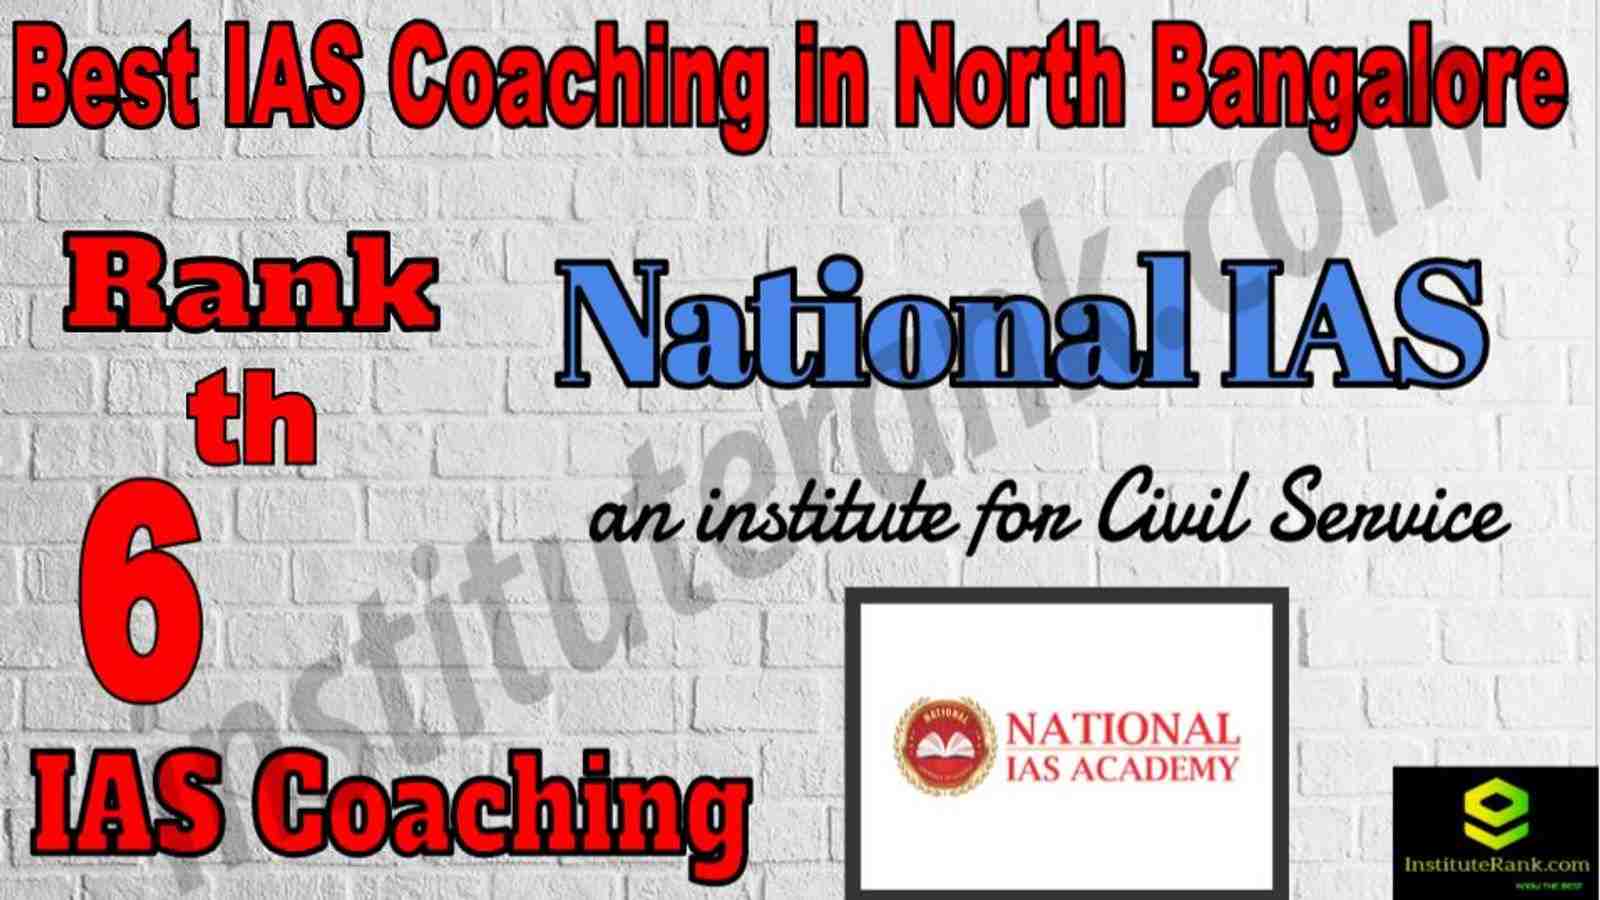 6th Best IAS Coaching in North Bangalore